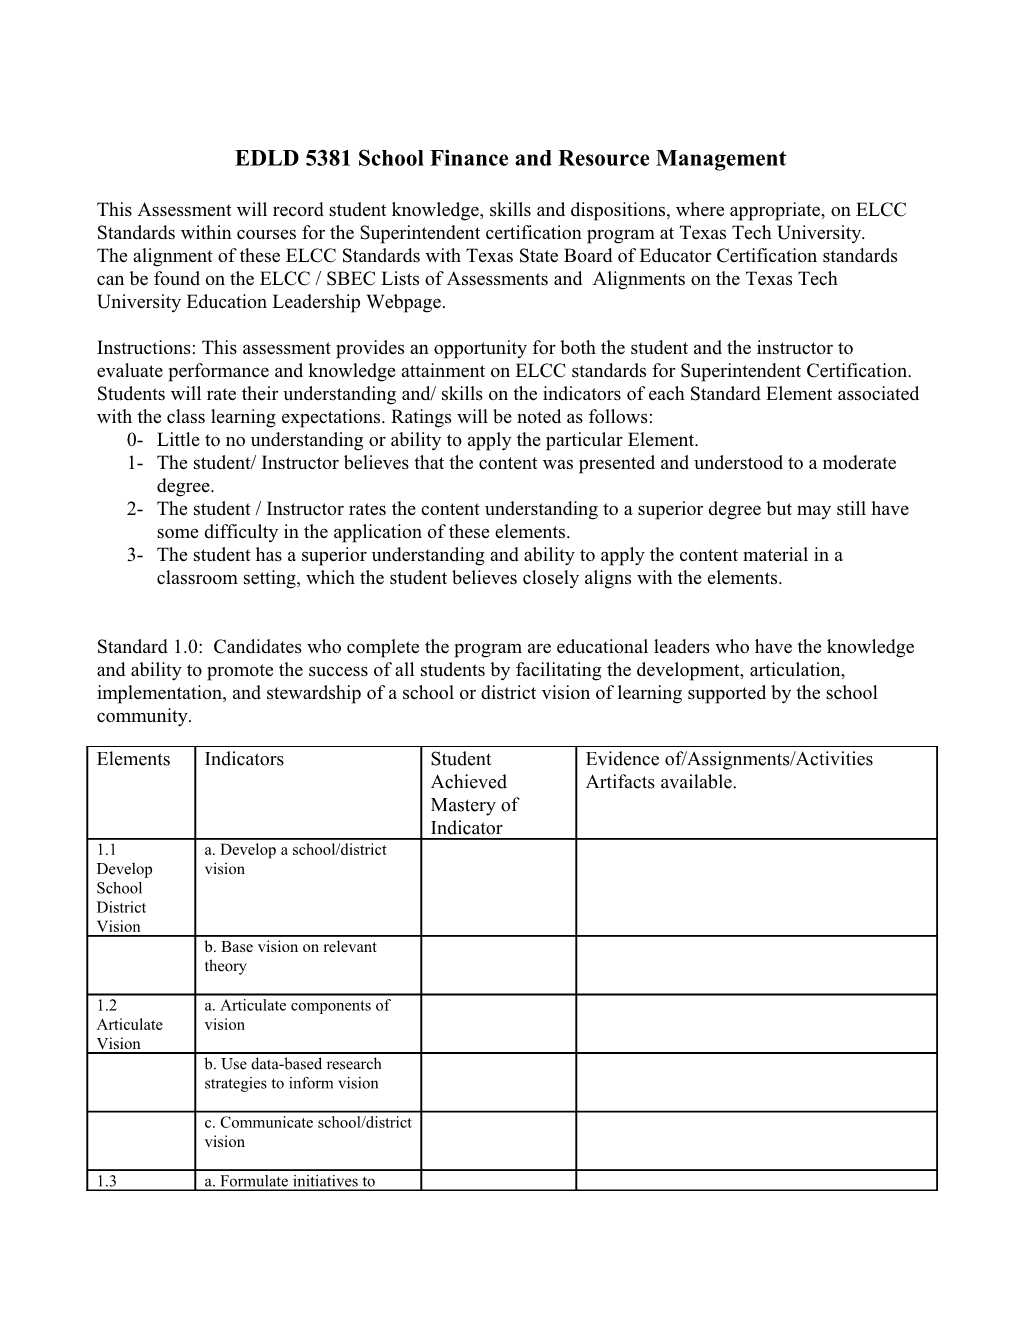 EDLD 5381 School Finance and Resource Management